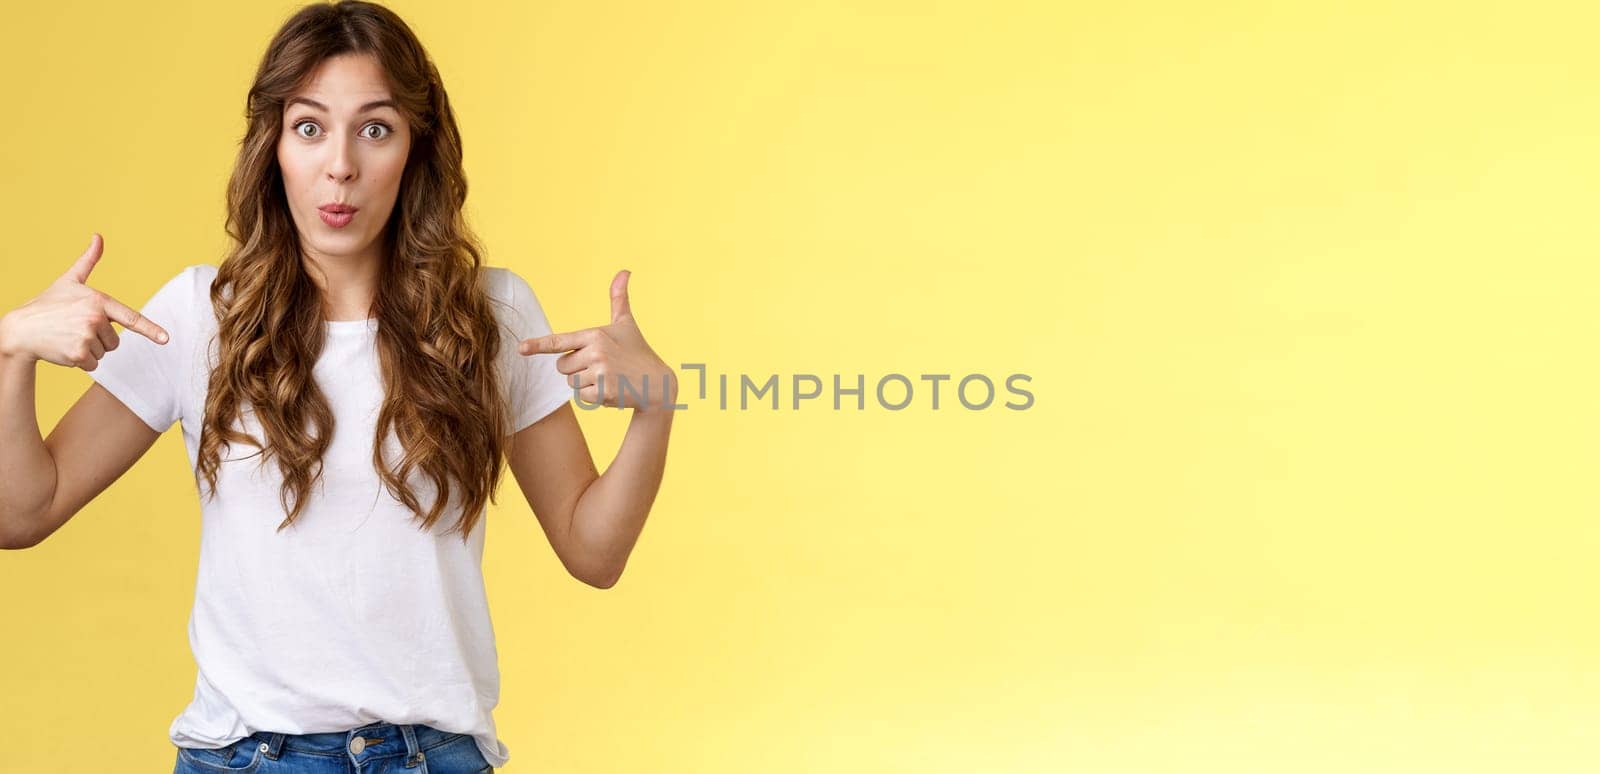 Wow just look. Impressed surprised cute wondered european girl pointing fingers center copy space white t-shirt folding lips amused astonished awesome promo great chance gaze you camera.